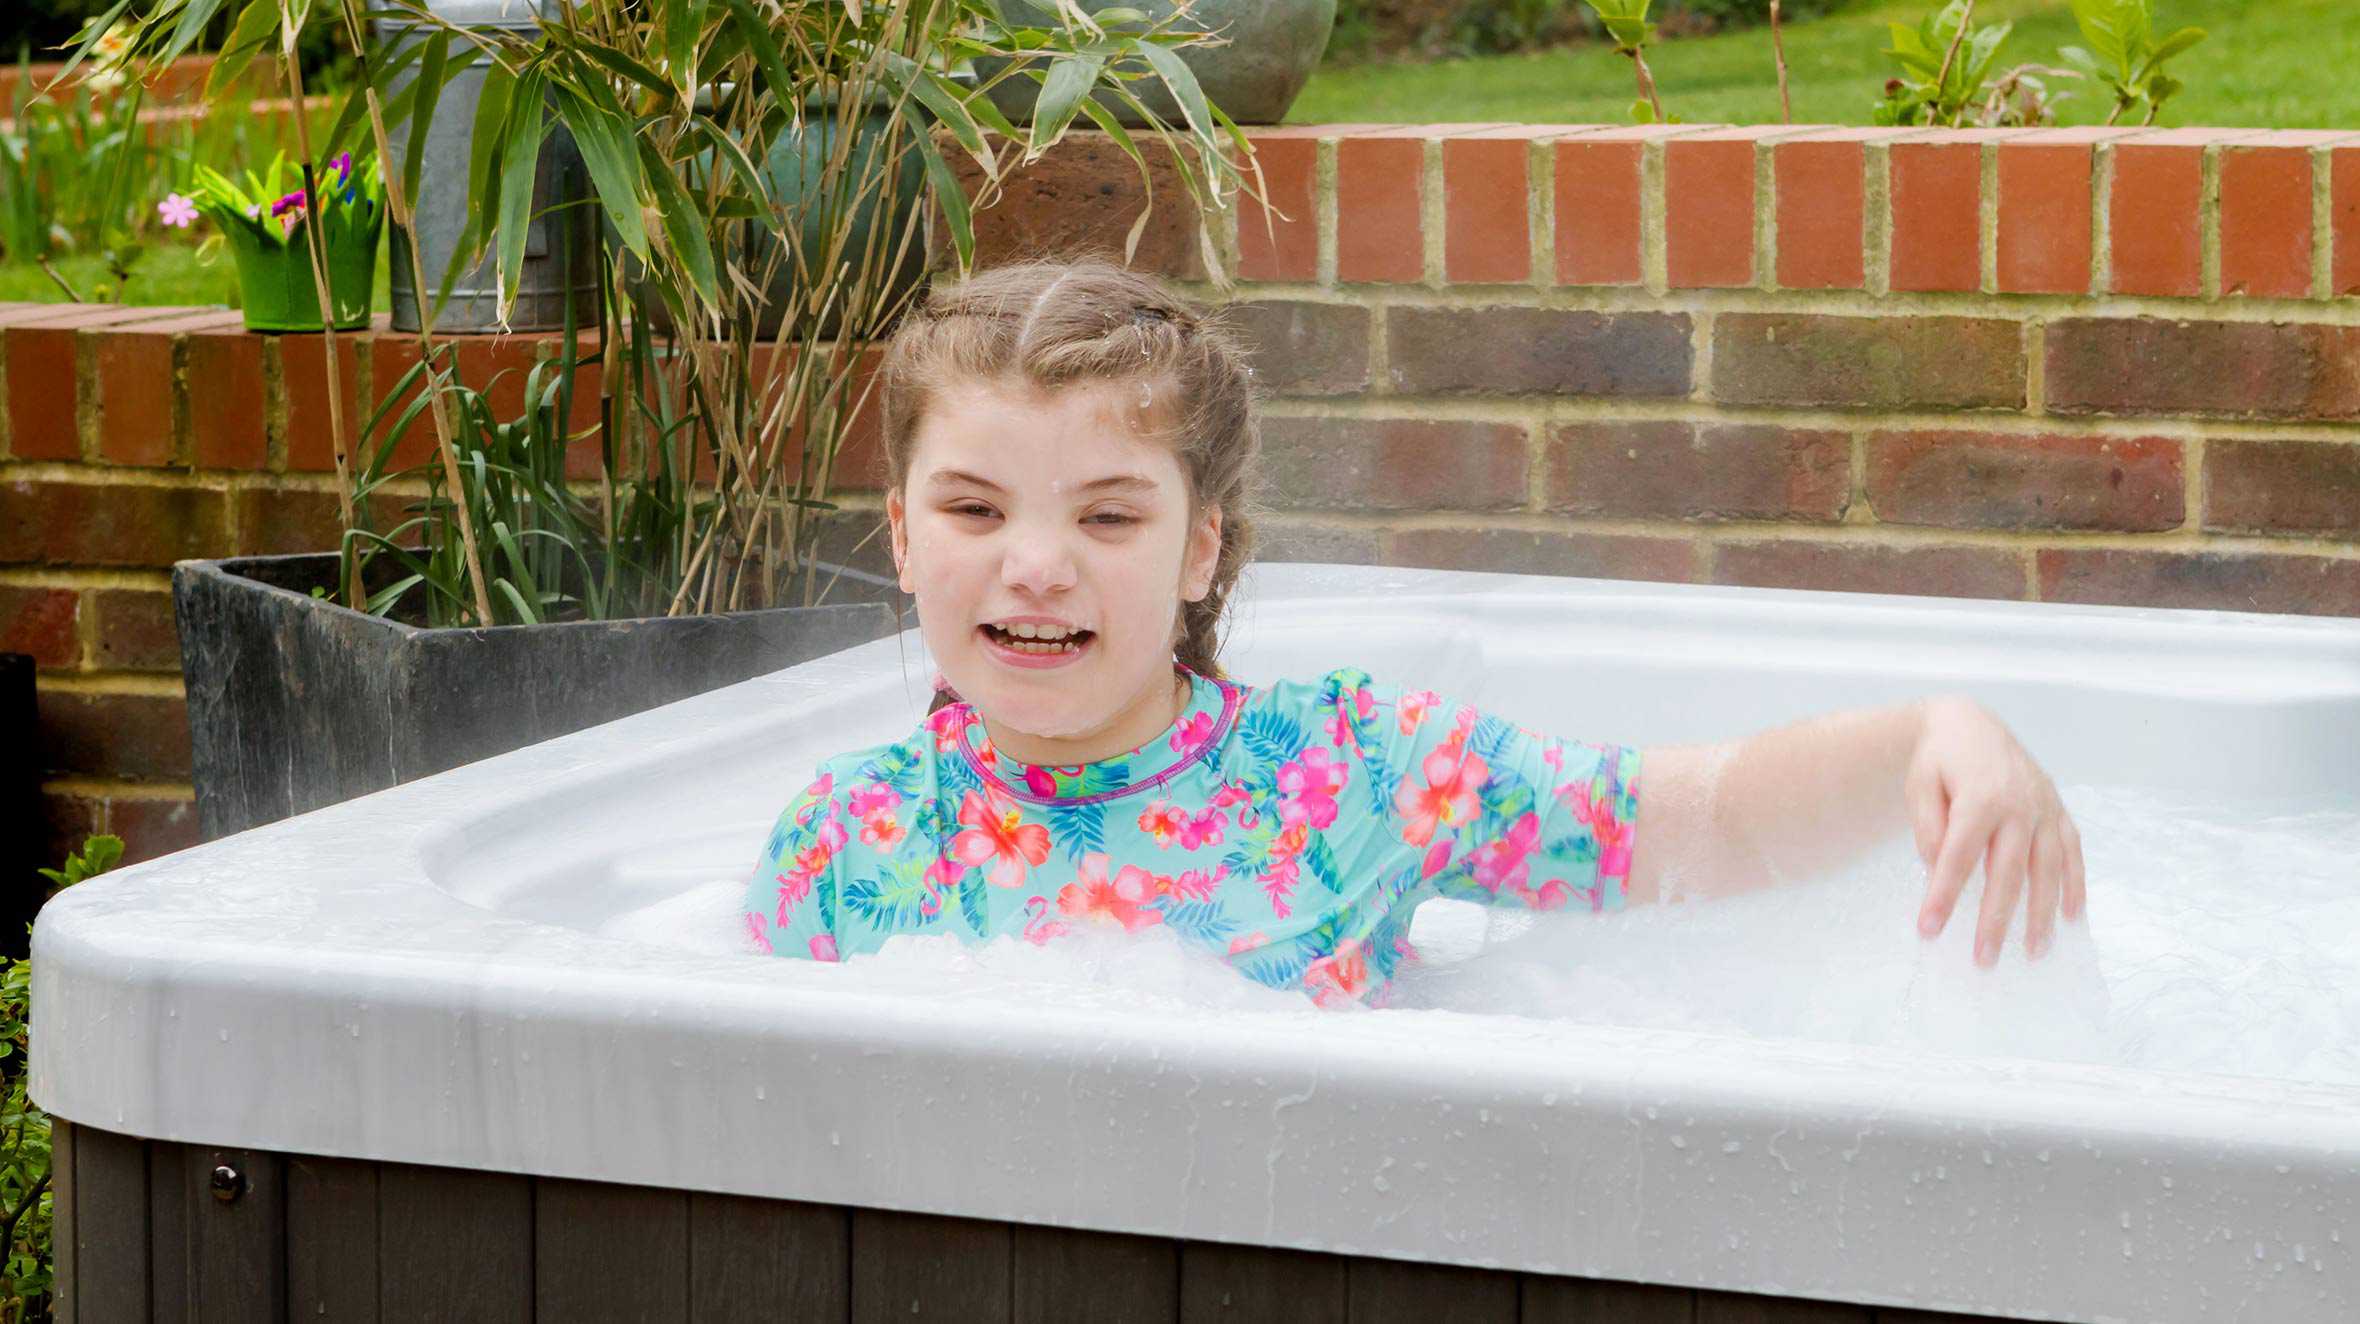 Wish child, Gracie, smiling in her new hot tub.